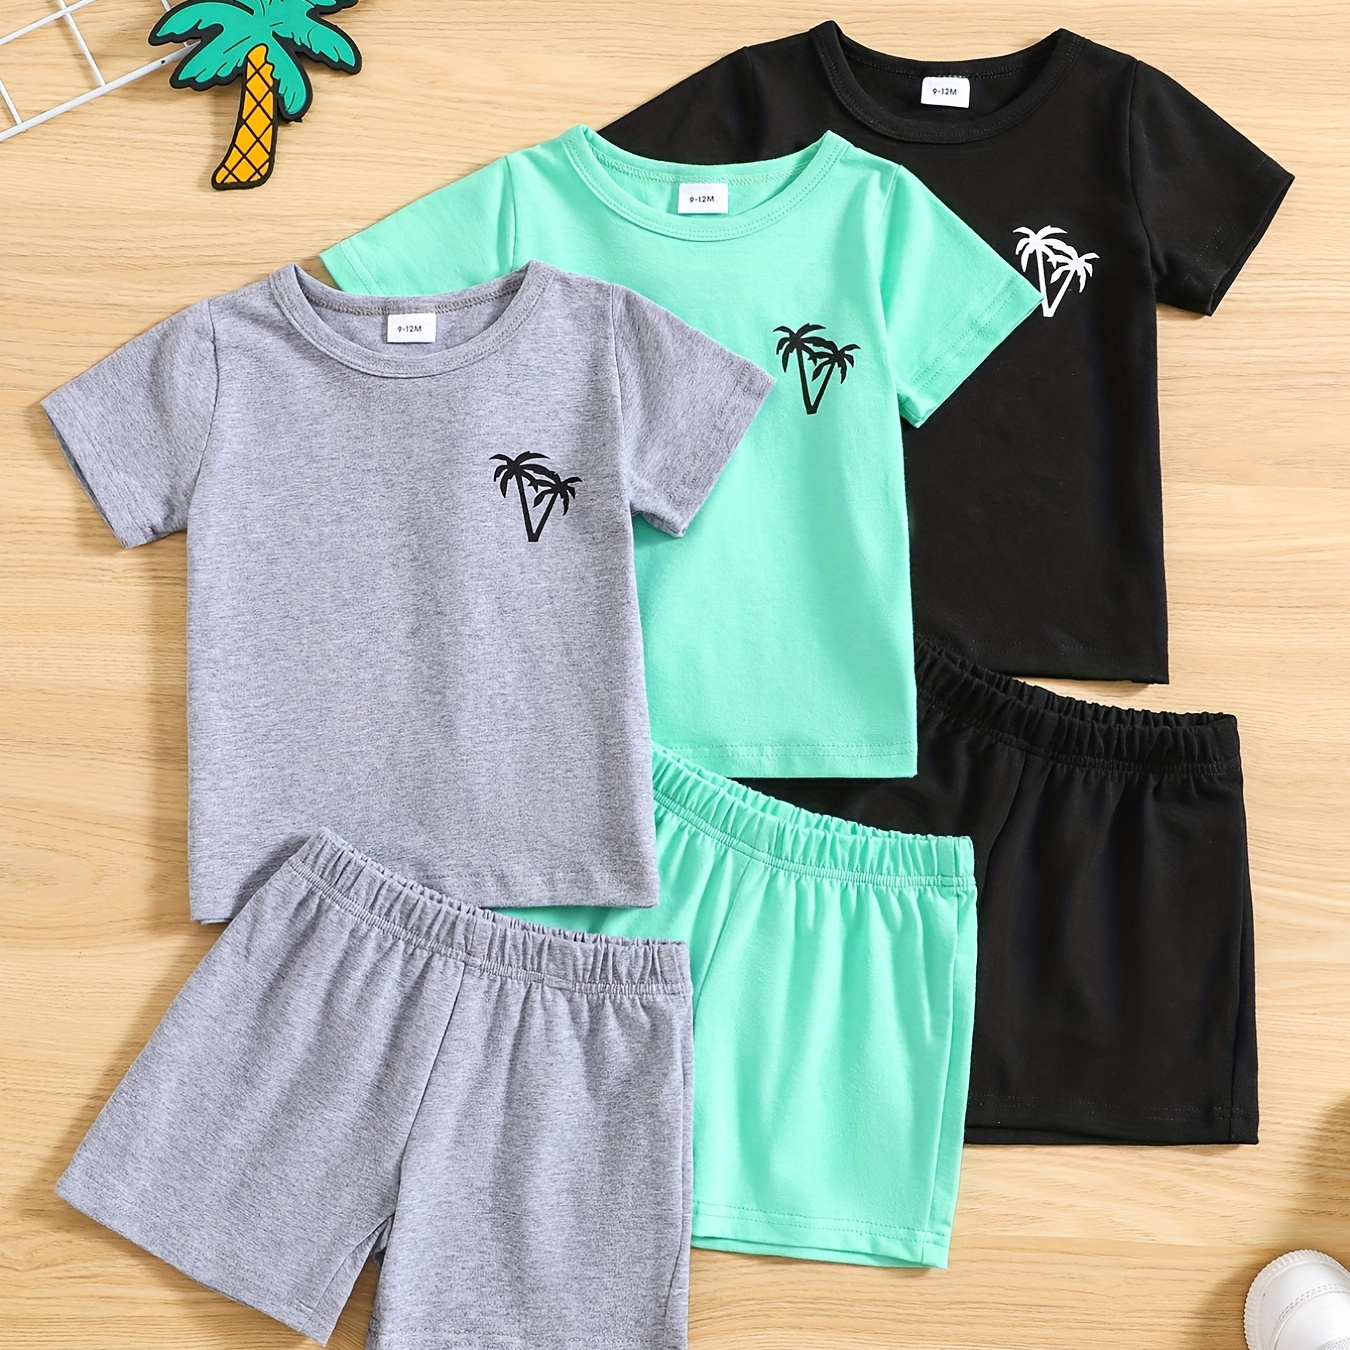 

3pcs Baby Boy's Casual Summer Outfits, Coconut Tree Graphic Short Sleeve T-shirt + Shorts Sets